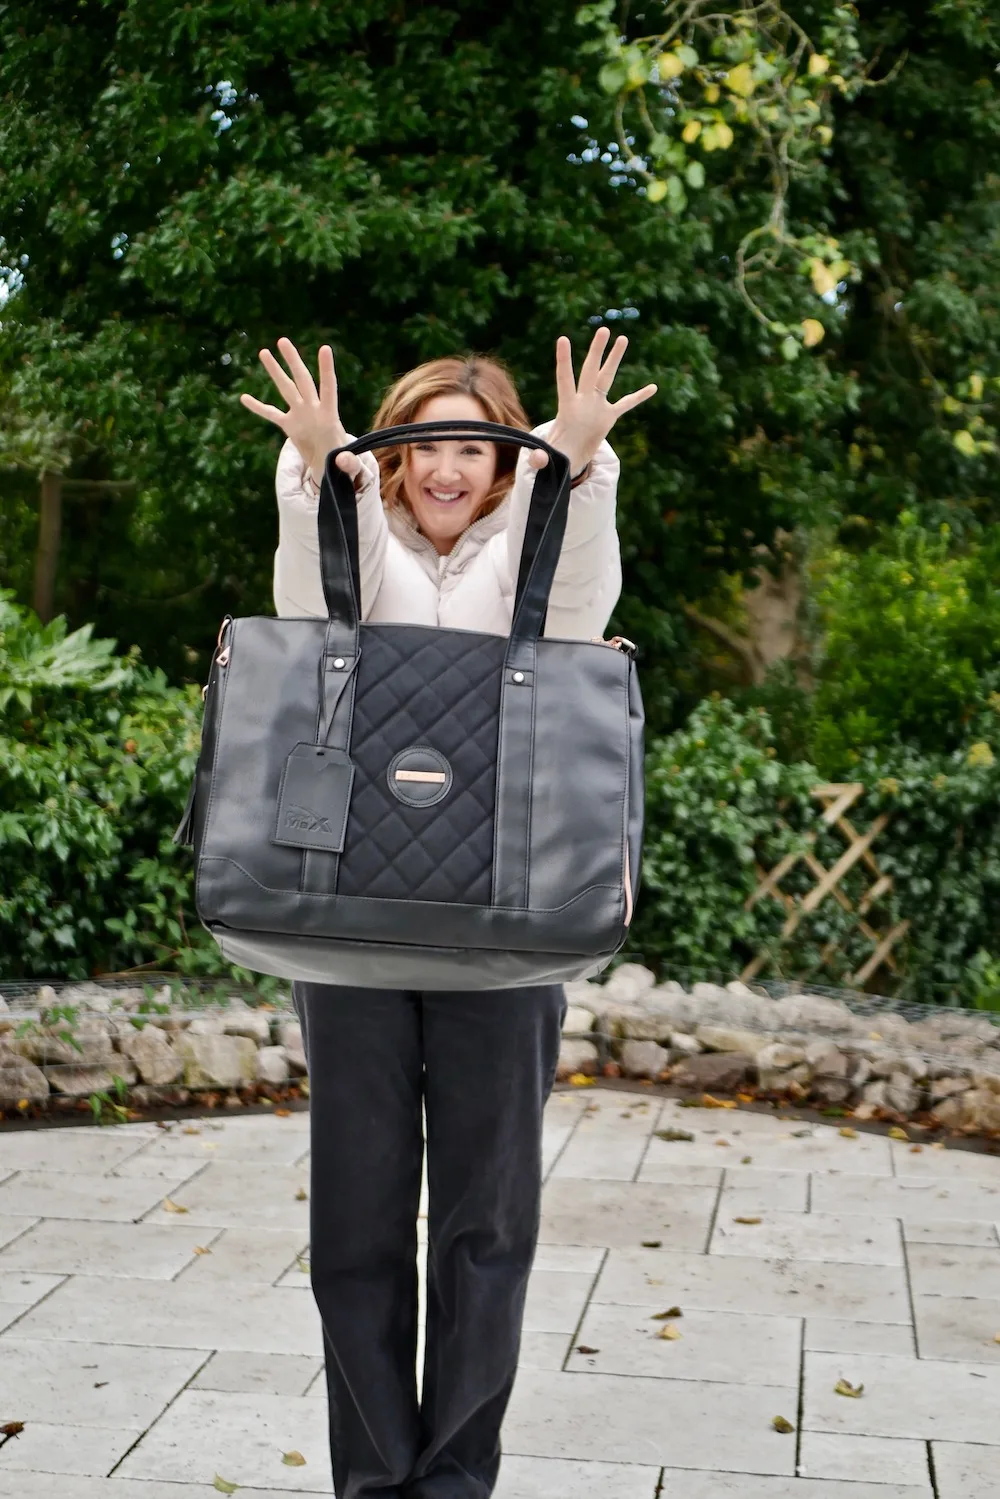 Travel Hack Tote Review: Affordable Luxury For A Weekend Getaway